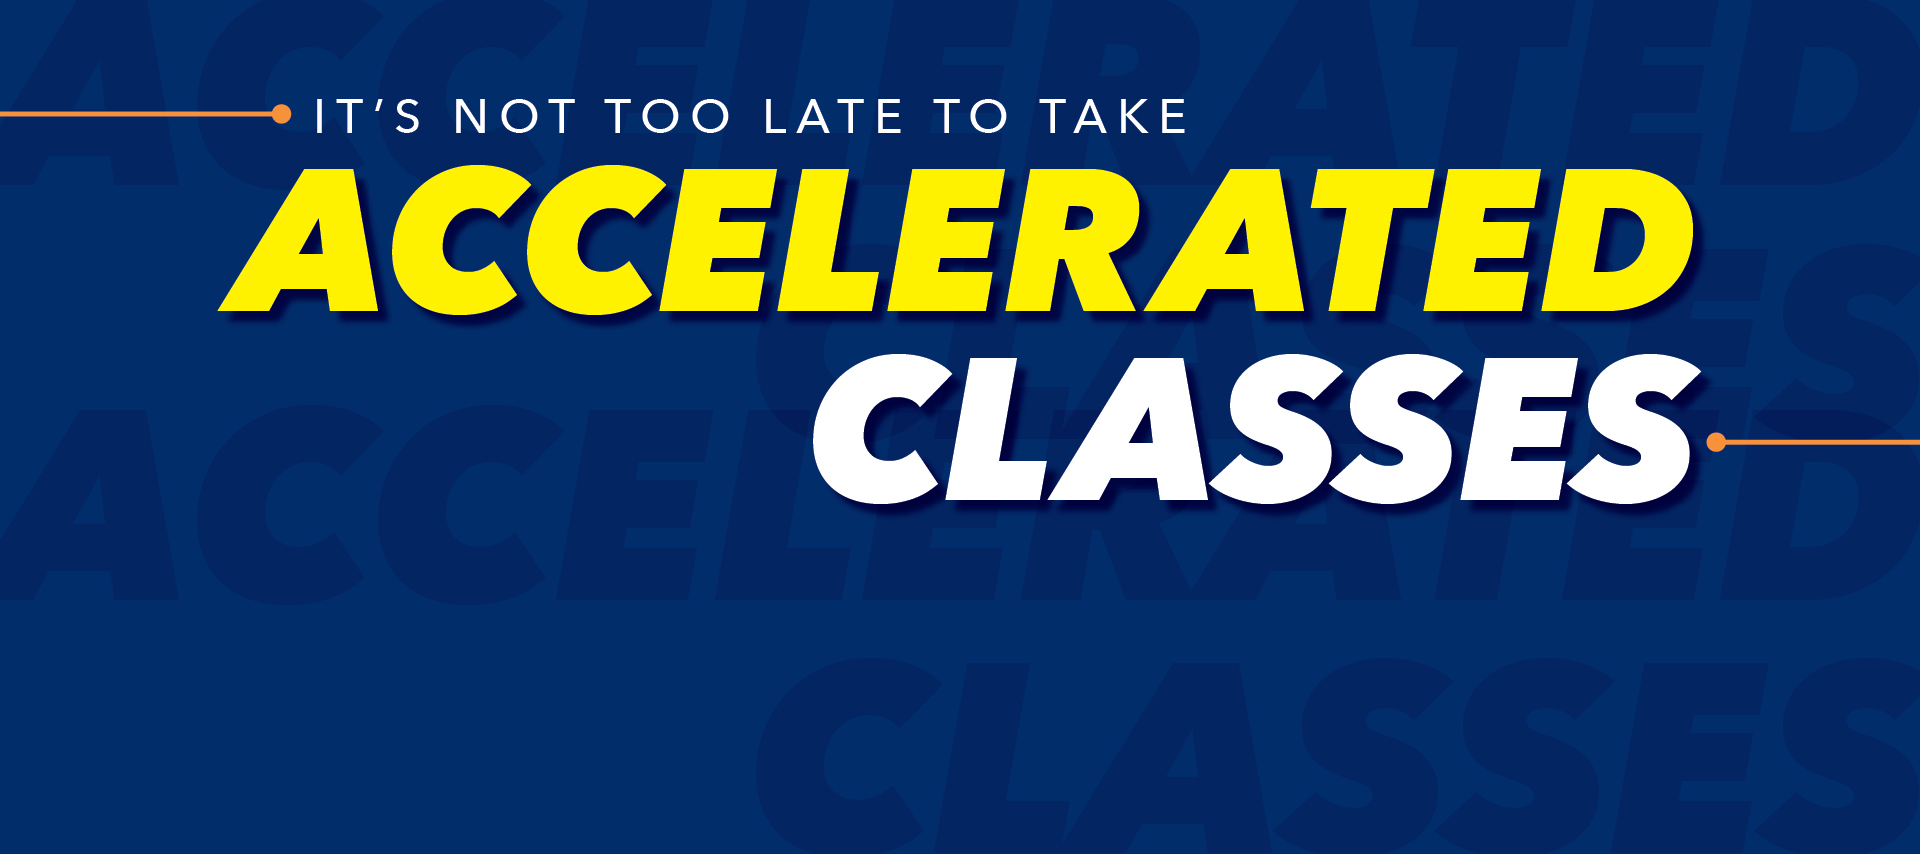 It's not to late to take Accelerated Classes